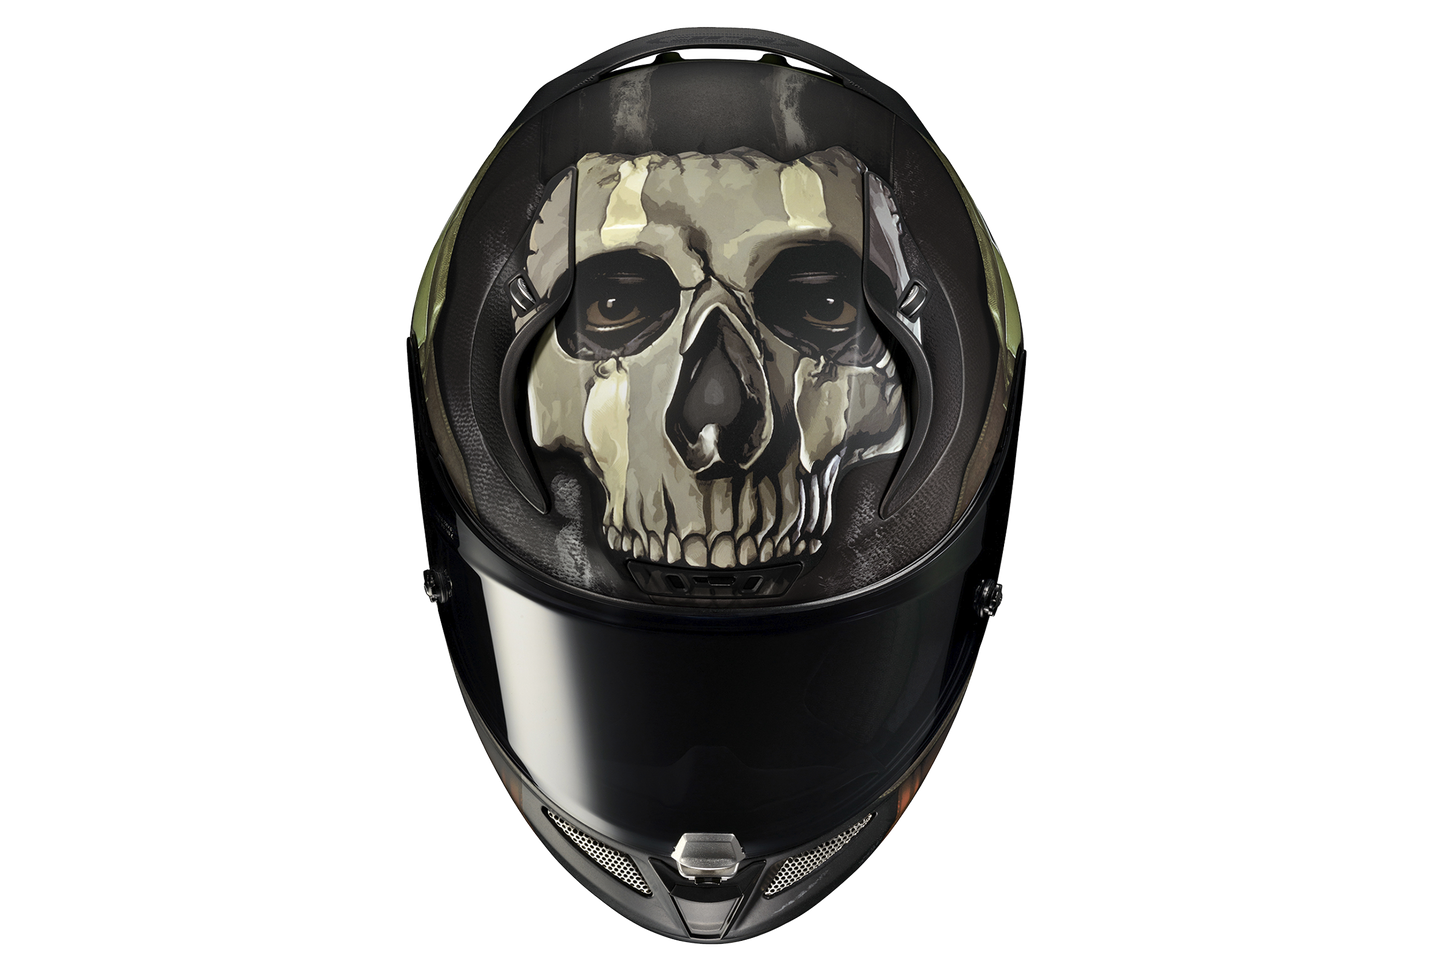 Casque Hjc Rpha 11 Ghost Call Of Duty